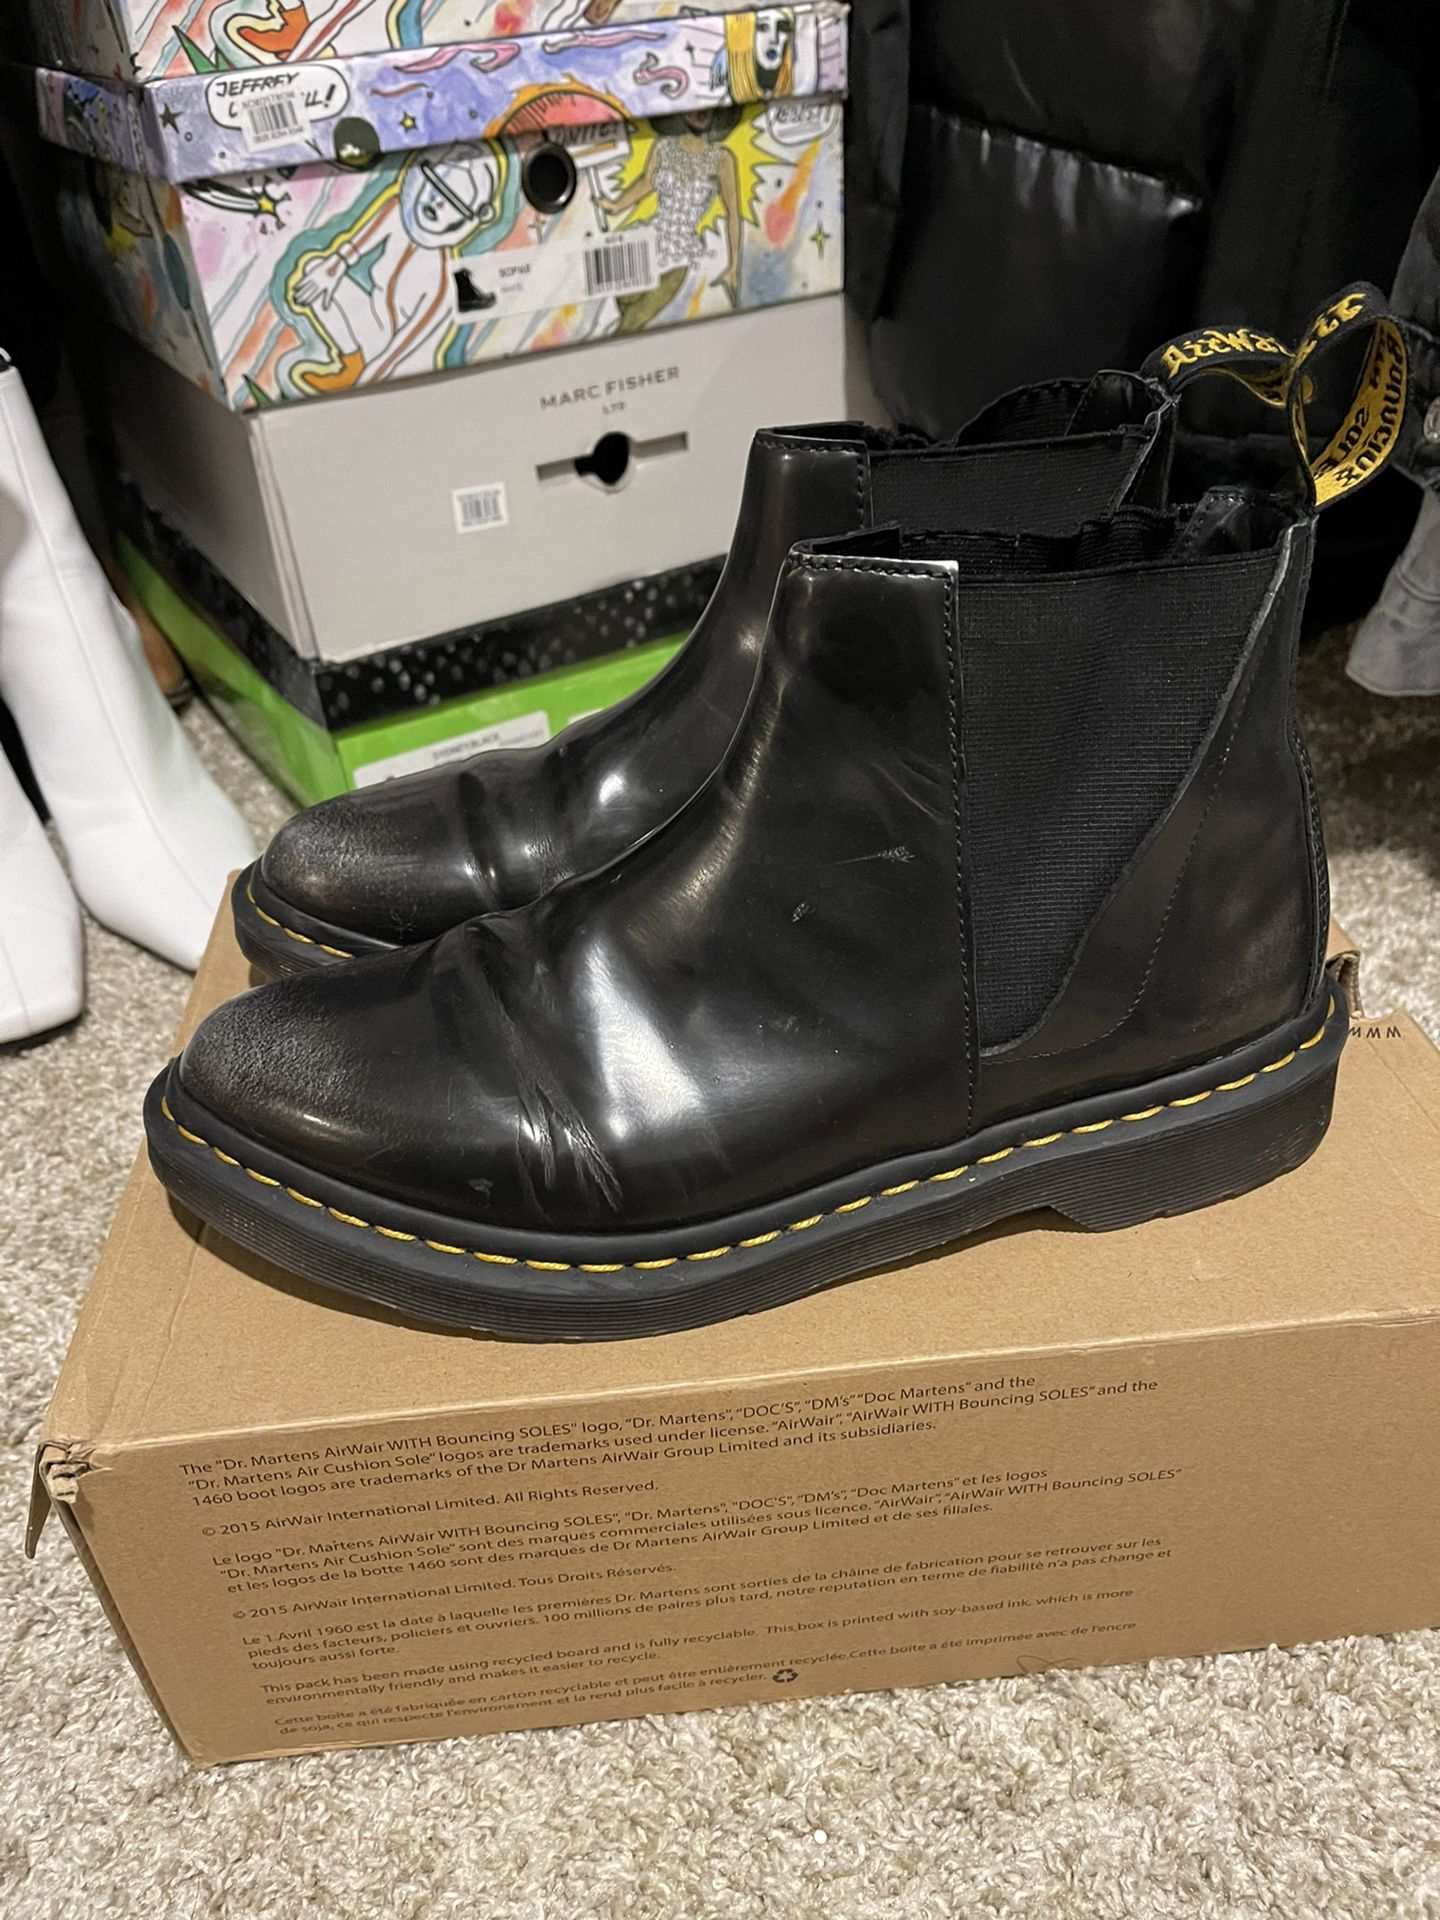 Dr. Martens Bianca Chelsea Boot for Sale Houston, TX - OfferUp